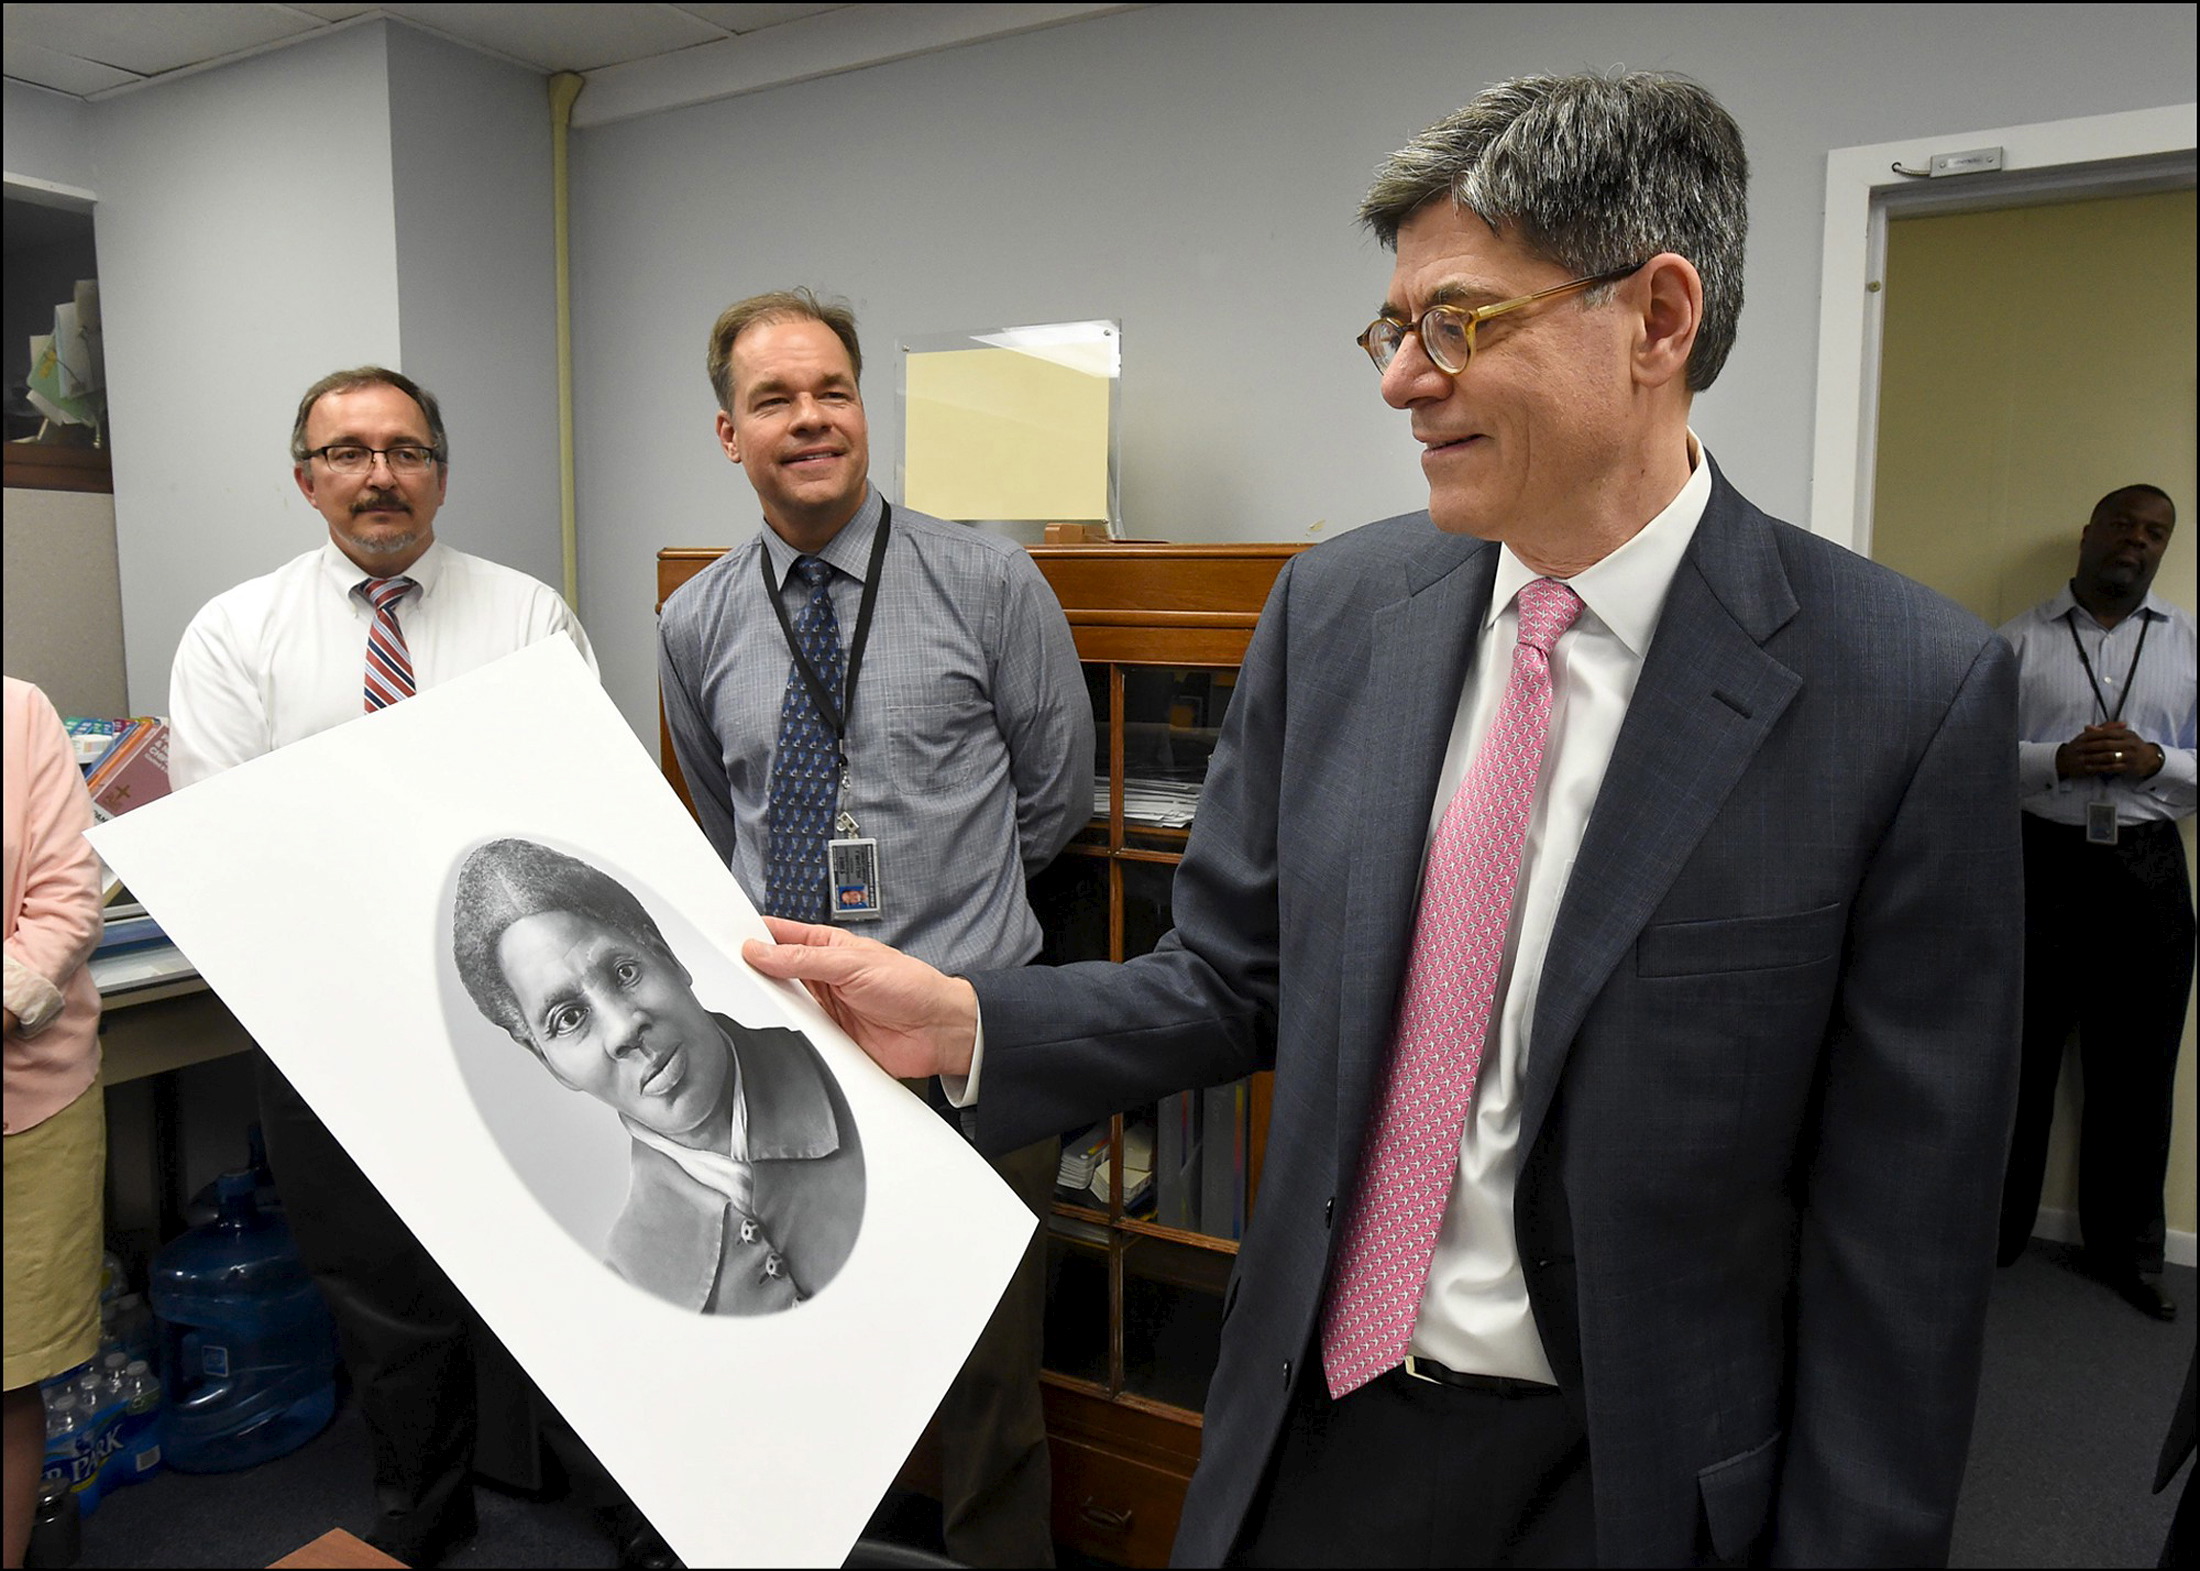 U.S. Secretary Jack Lew (R) looks at a rendering of Harriet Tubman during a visit to the Bureau of Engraving and Printing in Washington, U.S., in this handout photograph taken on April 21, 2016 and released on April 22. The visit follows Treasury's decision to replace former President Andrew Jackson with Tubman on the U.S. $20 bill, and put leaders of the women's suffrage movement on the back of $10 bill. Picture taken April 21, 2016. Department of Treasury/Chris Taylor/Handout via Reuters 